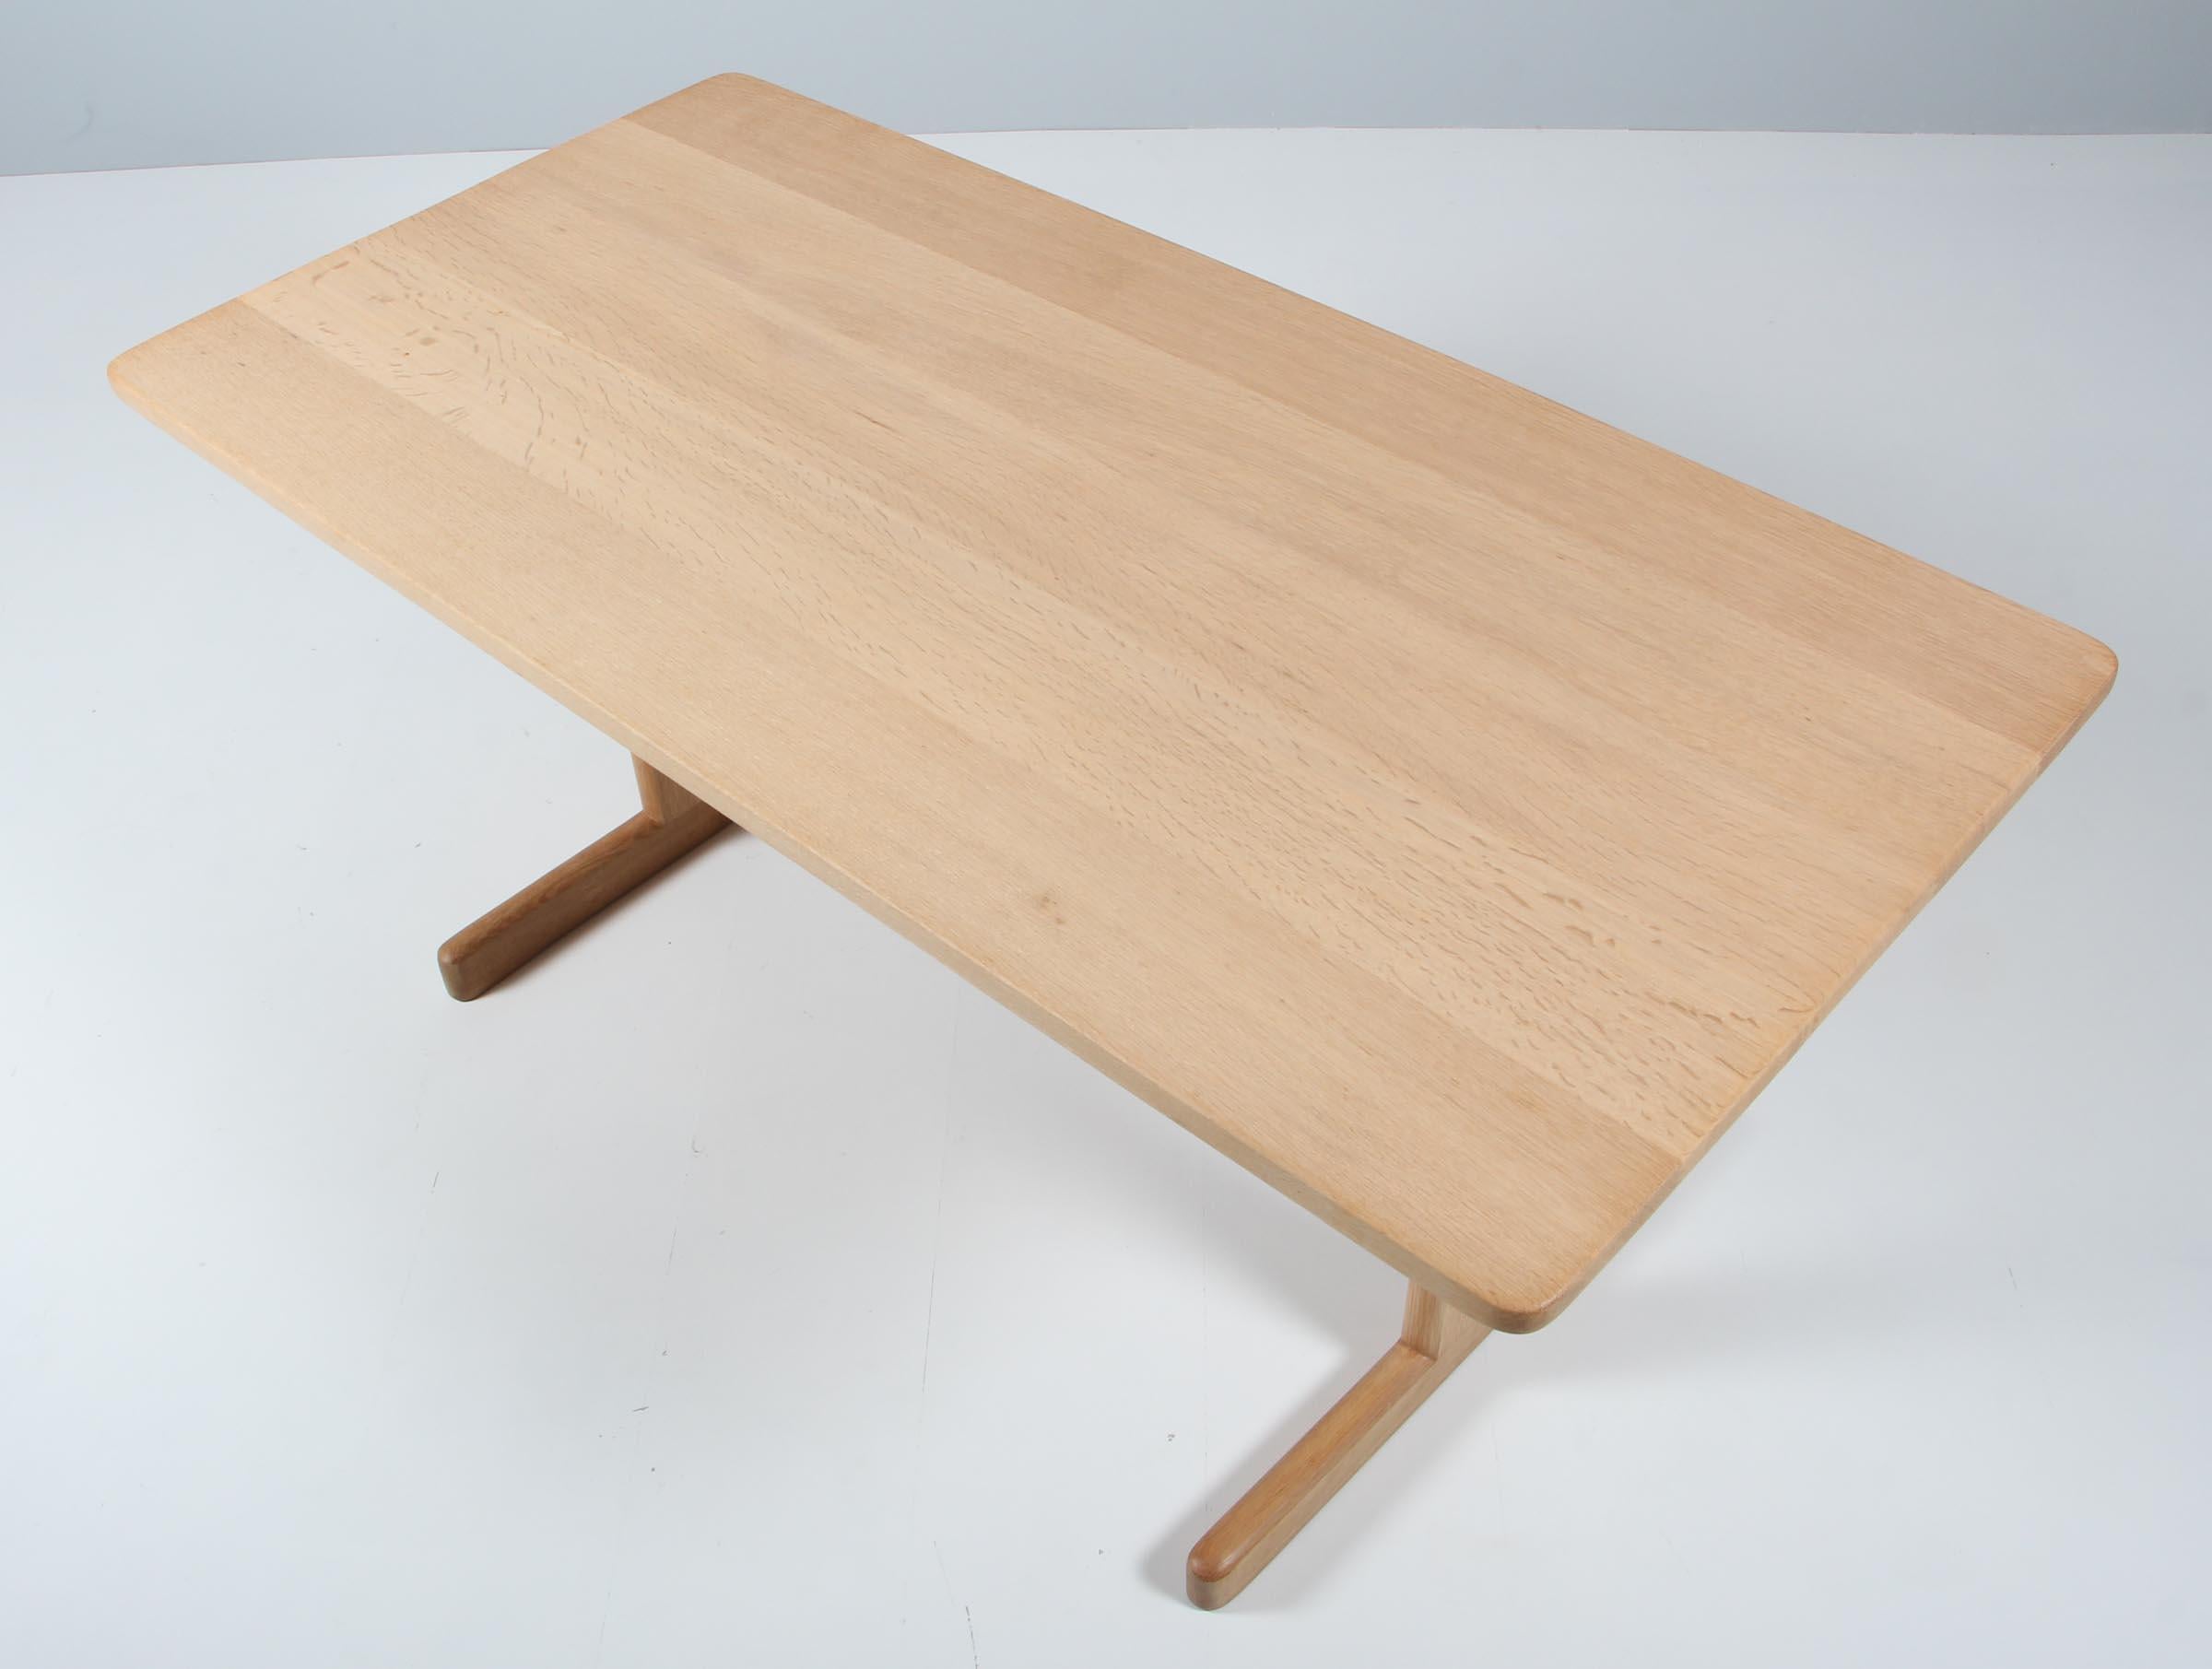 Børge Mogensen coffee table in solid oak.

Model 5267, made by Fredericia Furniture.